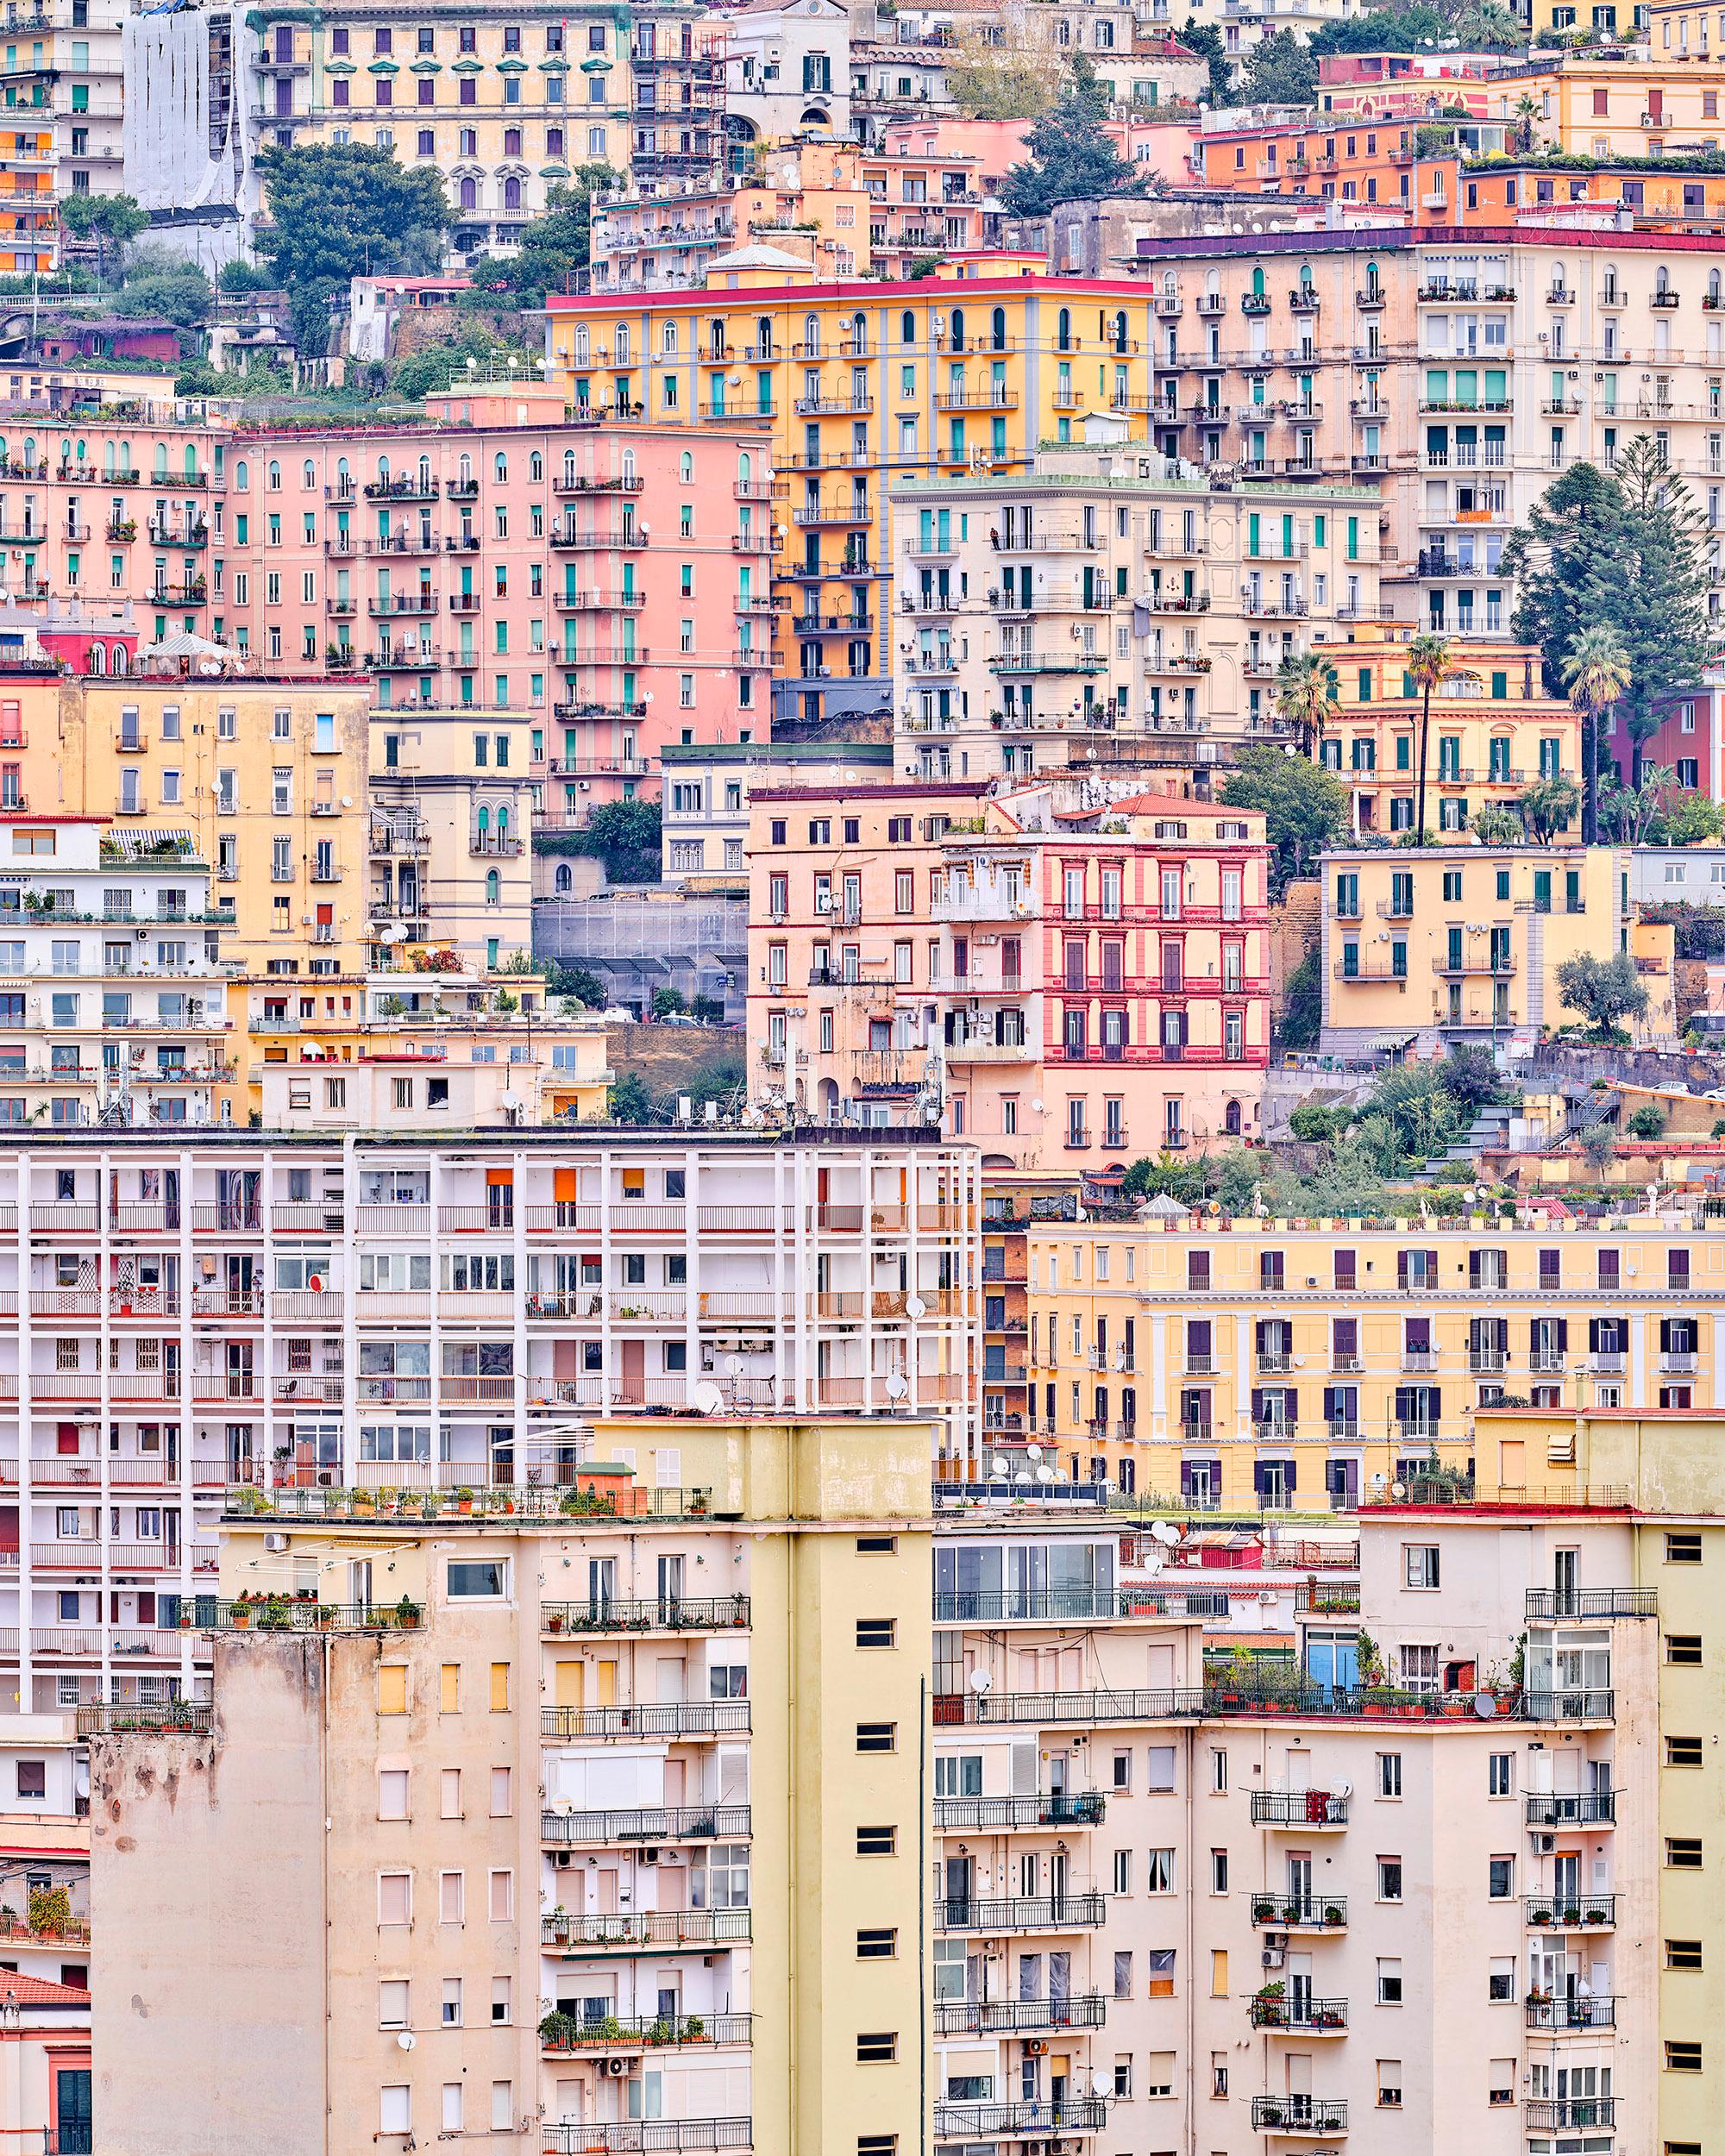 Naples, Italy

Available Sizes:
26 x 21 inches: Edition of 7
40 x 32 inches: Edition of 7
55 x 44 inches: Edition of 10
73.5 x 59 inches: Edition of 5

David Burdeny (b. 1968. Winnipeg, Canada) graduated with a Masters in Architecture and Interior